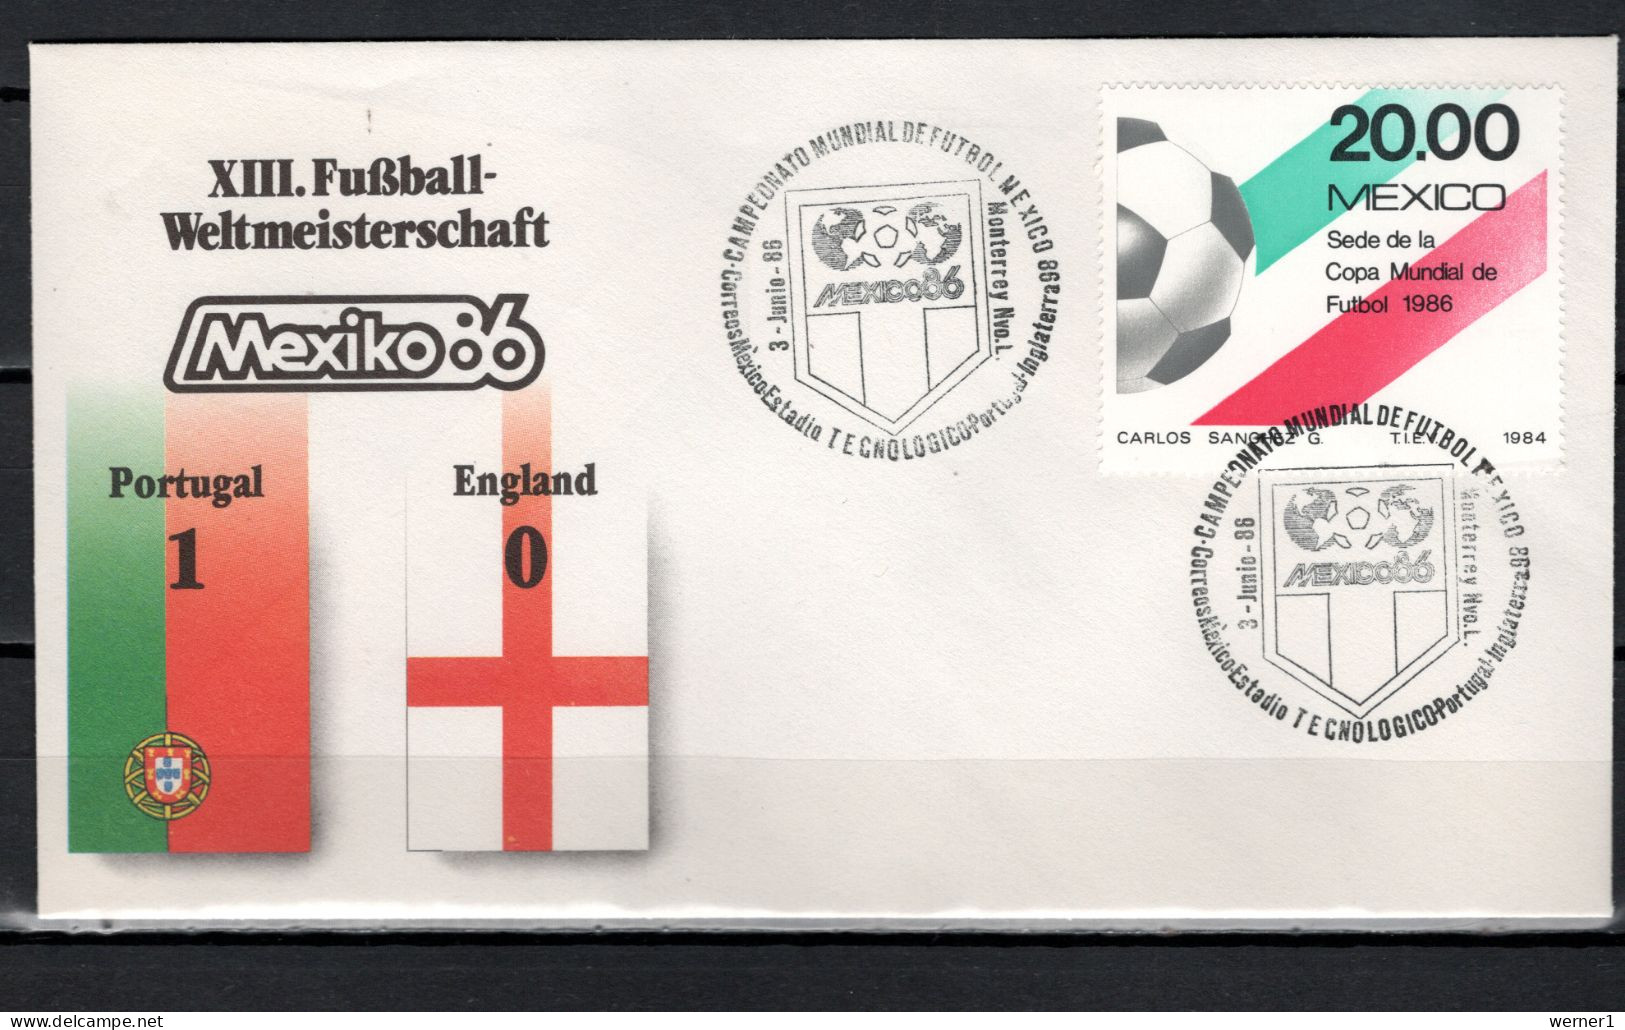 Mexico 1986 Football Soccer World Cup Commemorative Cover Match Portugal - England 1 : 0 - 1986 – Mexico